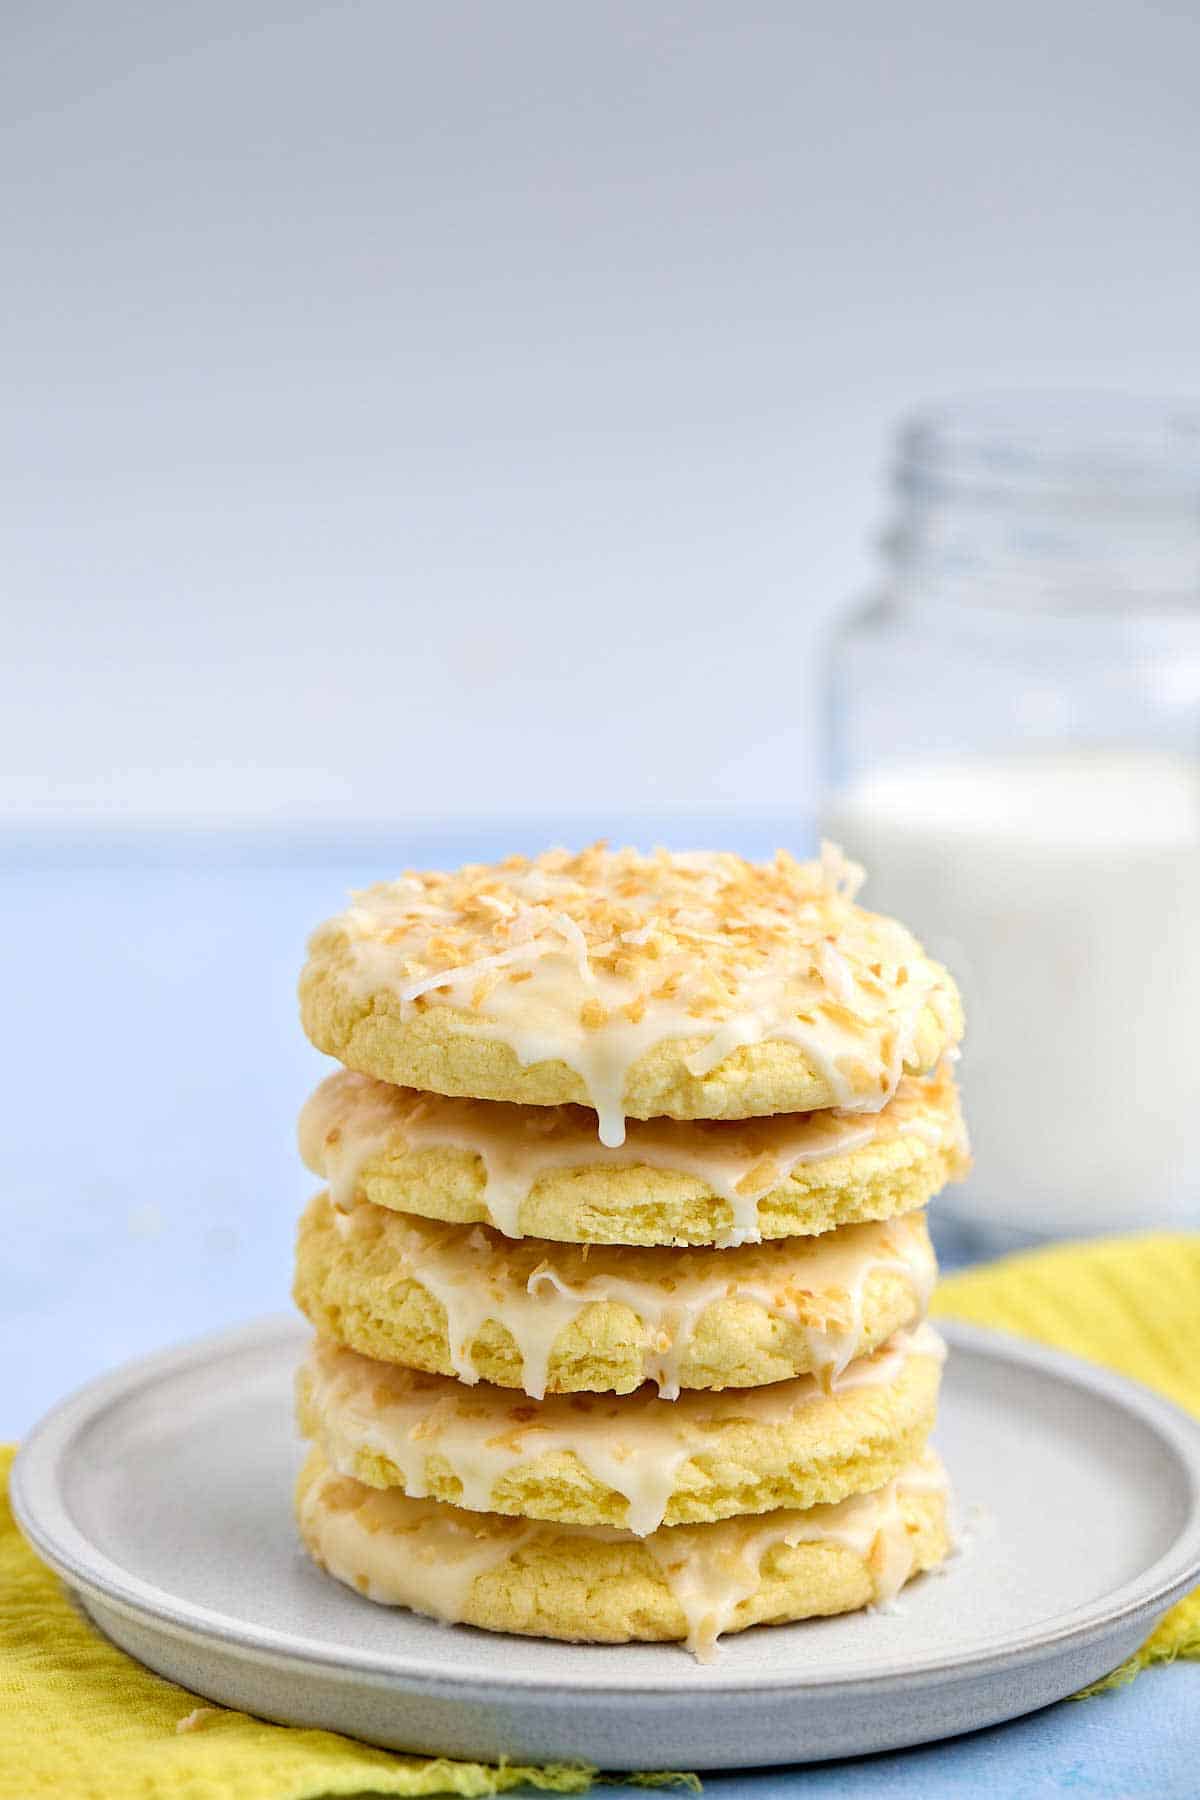 Stack of cookies on a plate with a glass of milk in the background.